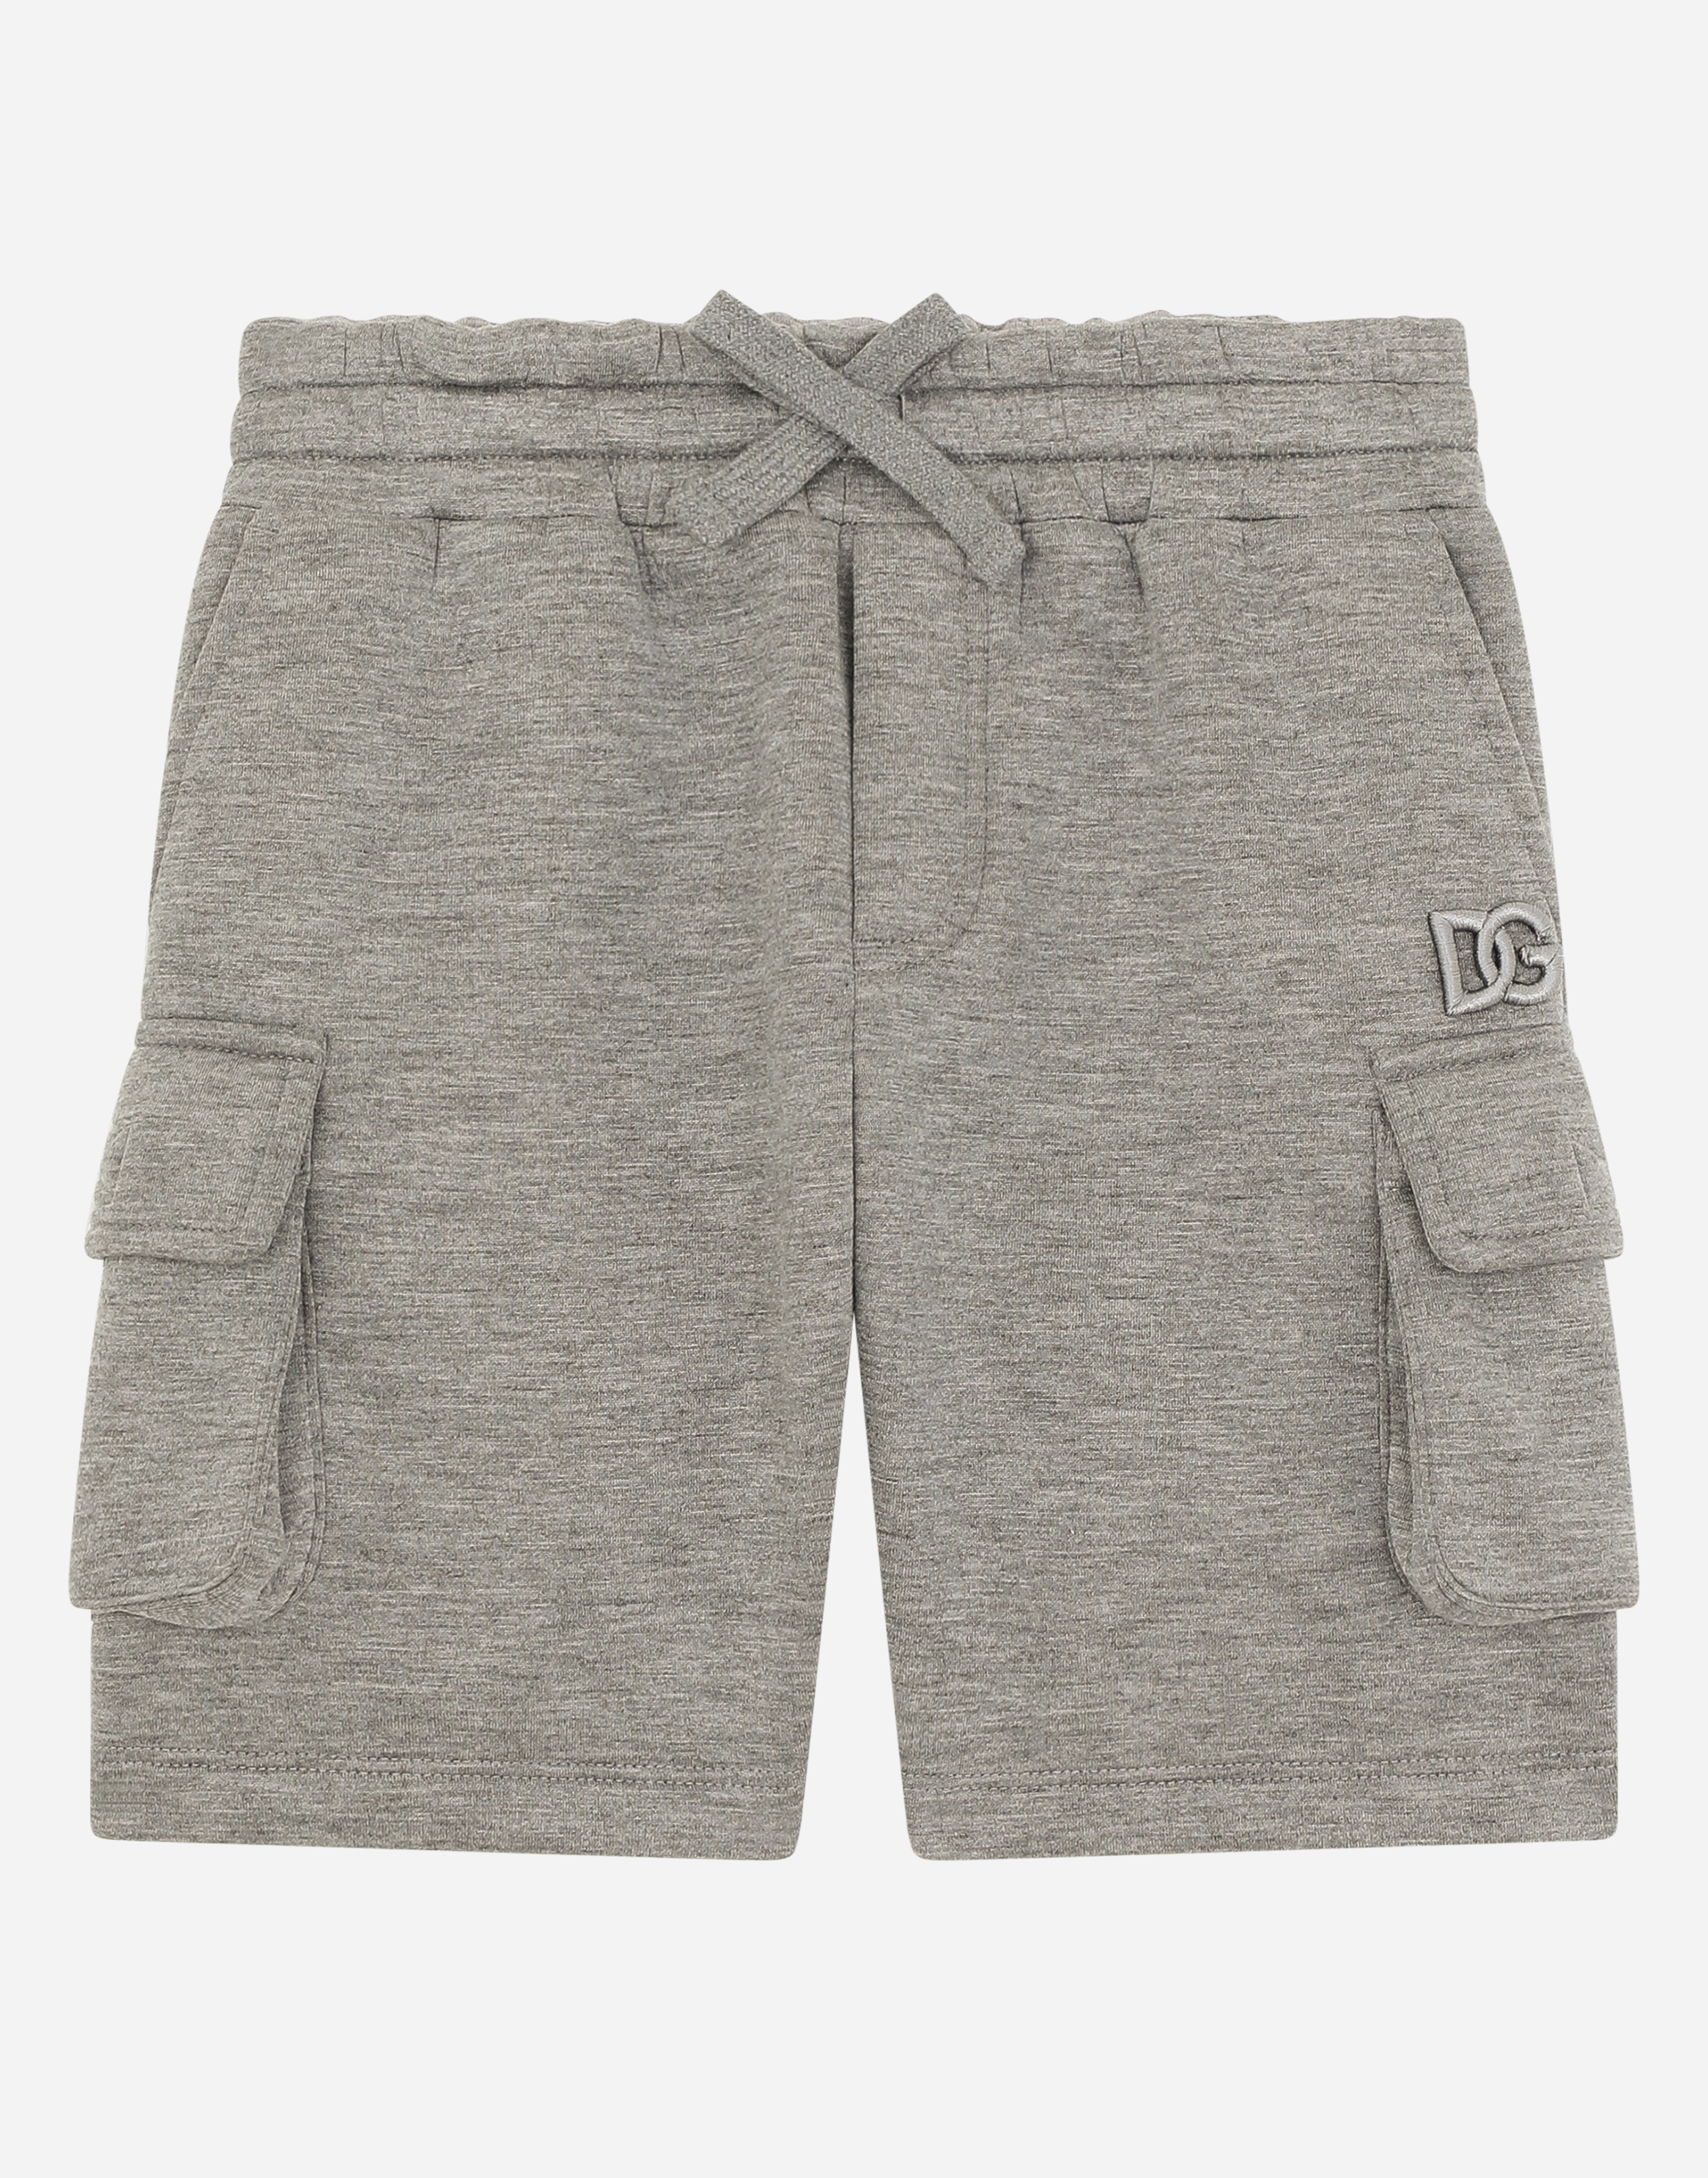 Jersey cargo shorts with DG logo in Grey